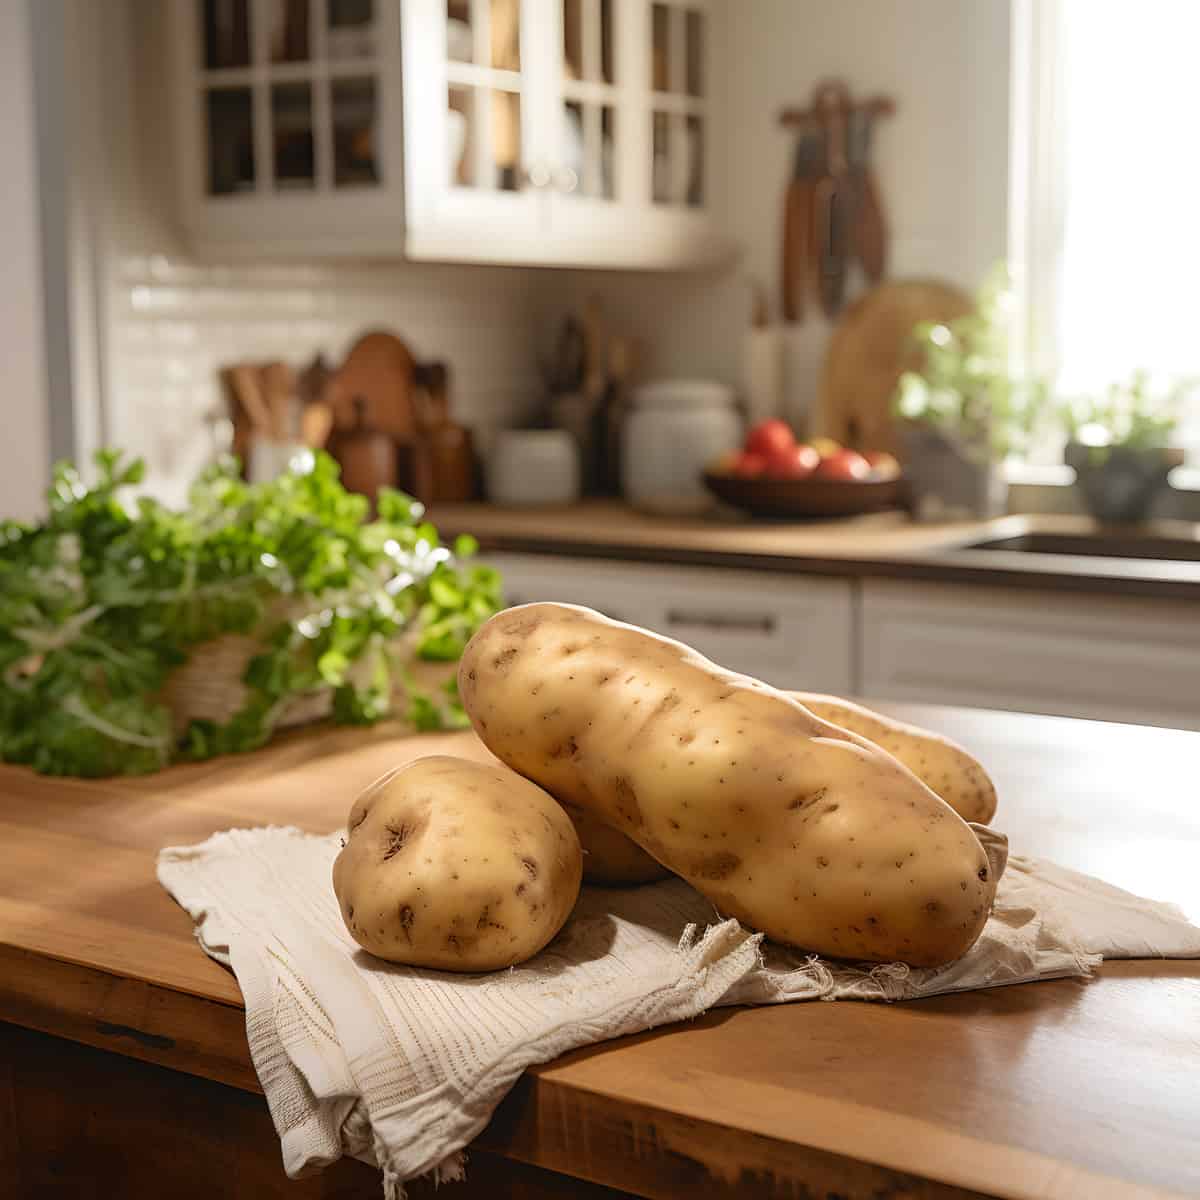 Norgold Russet Potatoes on a kitchen counter